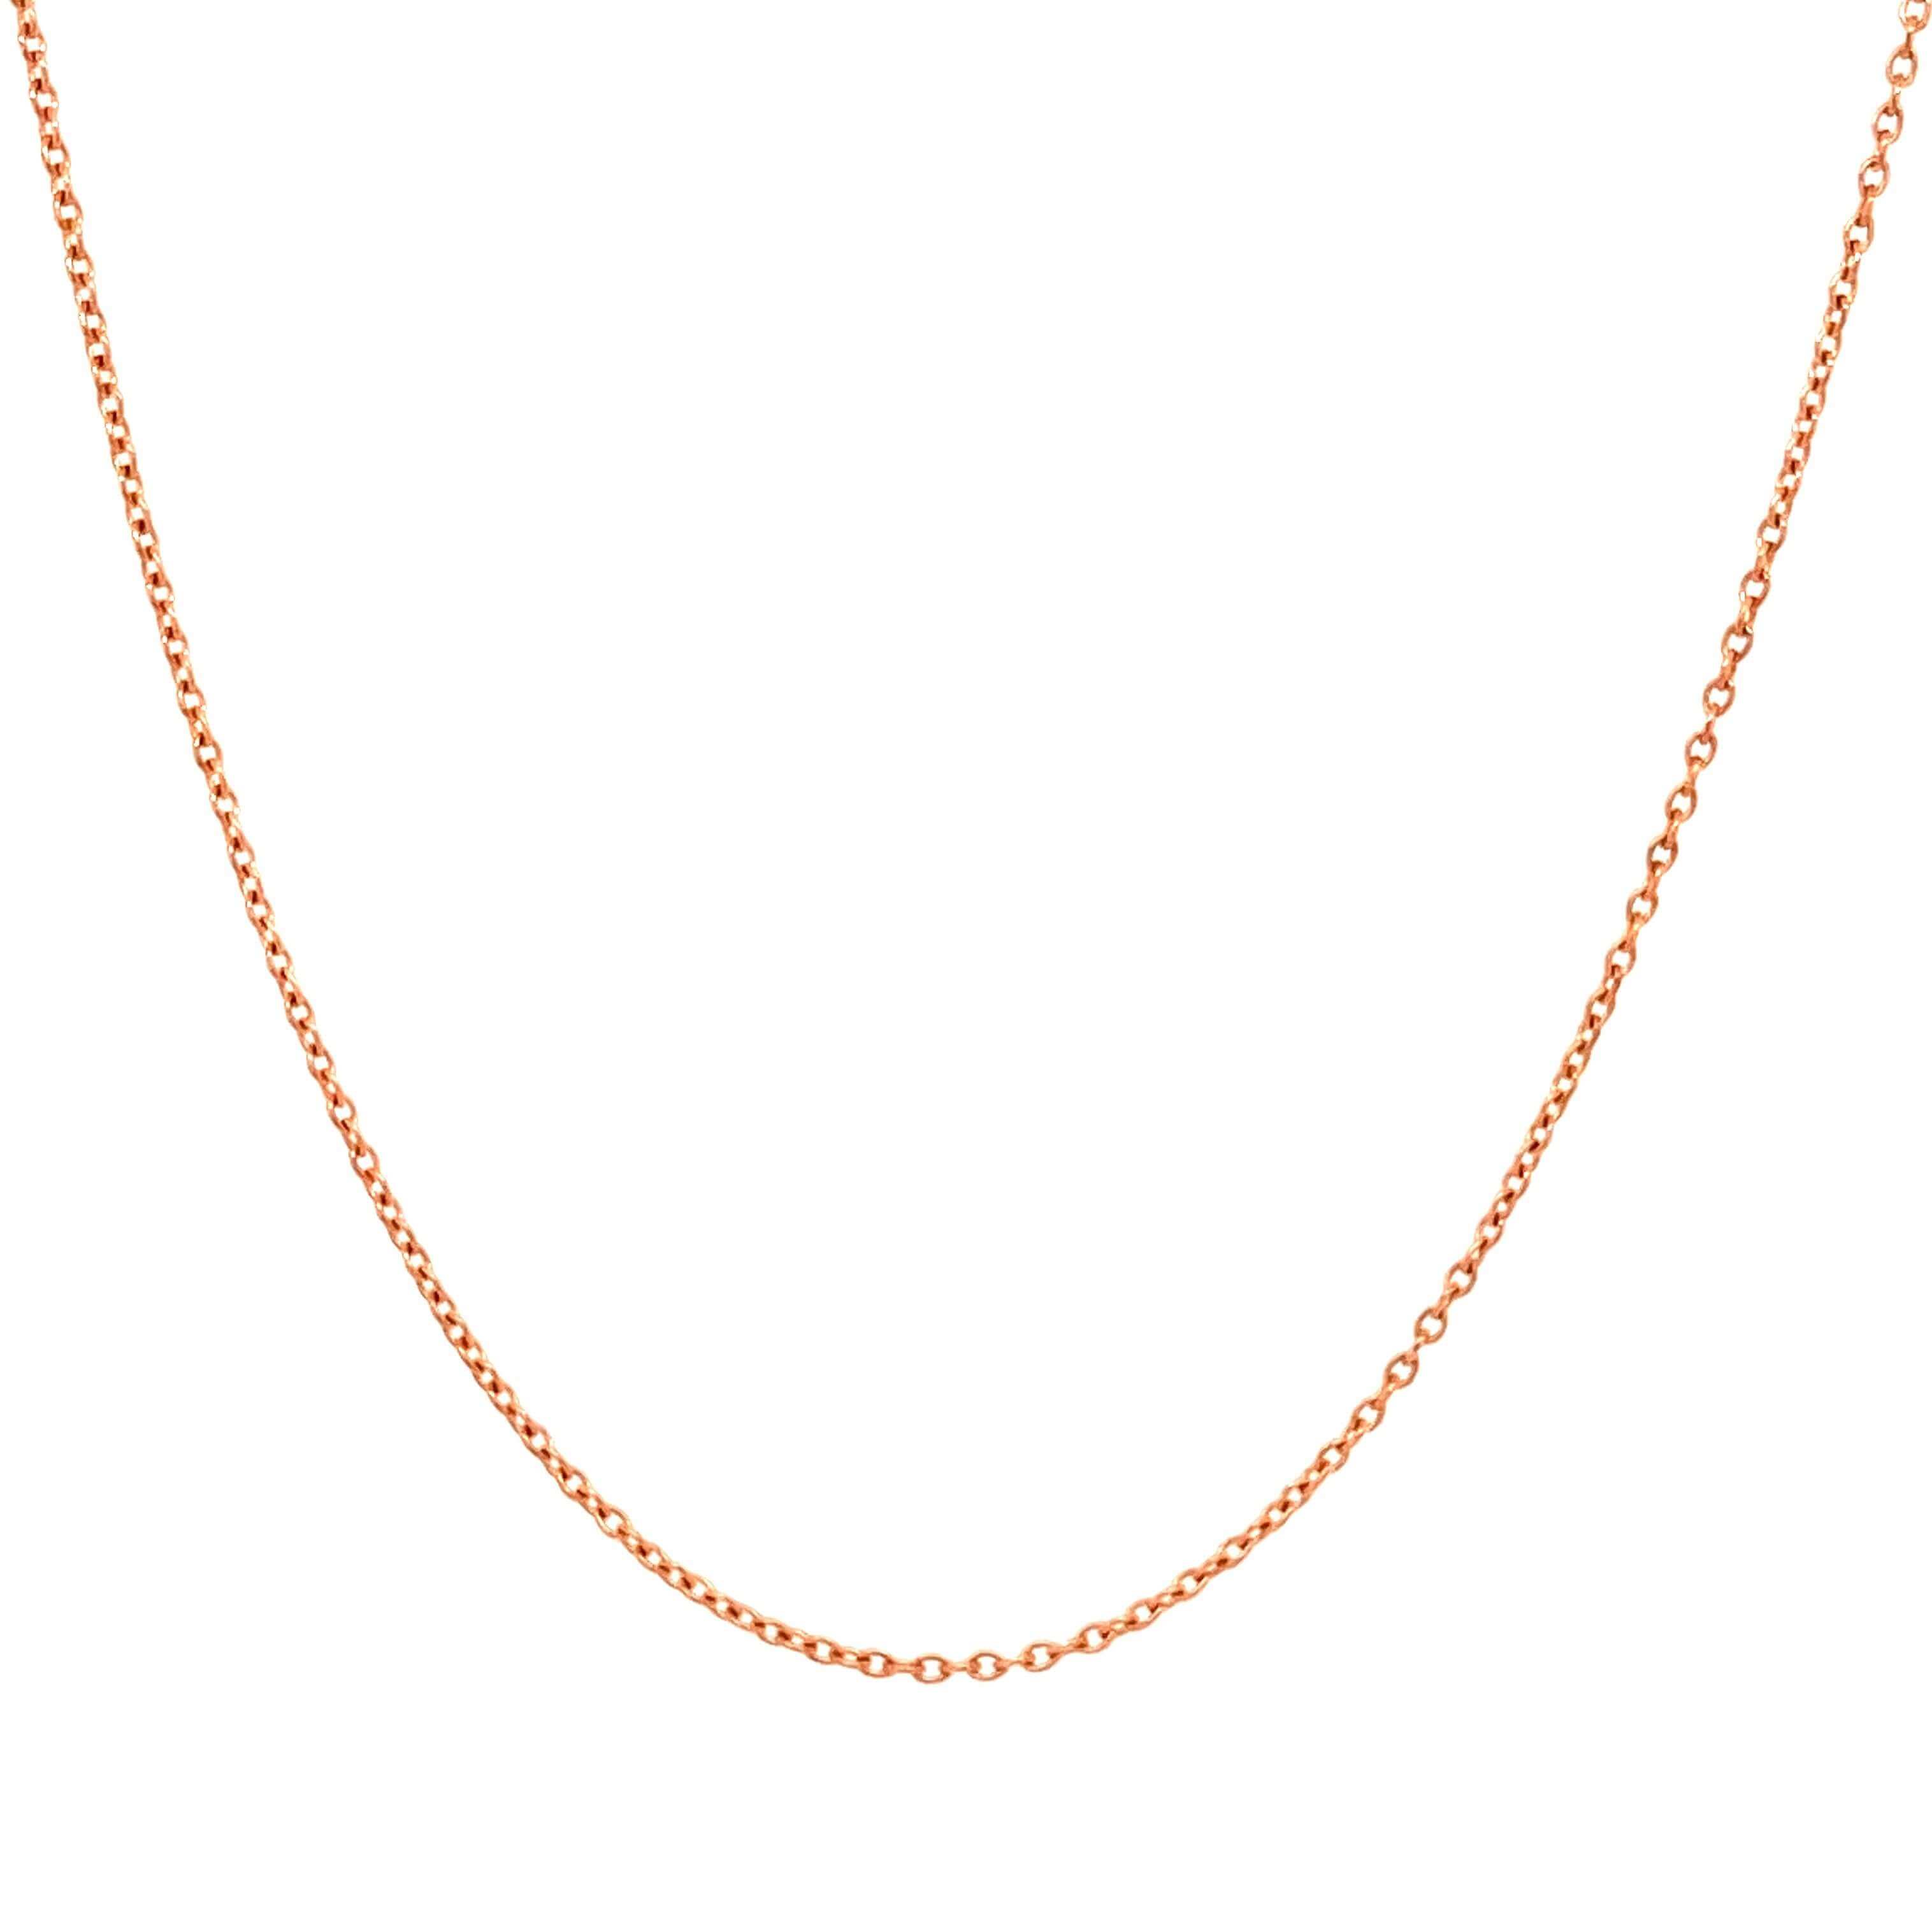 10K Yellow Gold 7.5 MM Rolo Chain Necklace For Women - Bijouterie Langlois